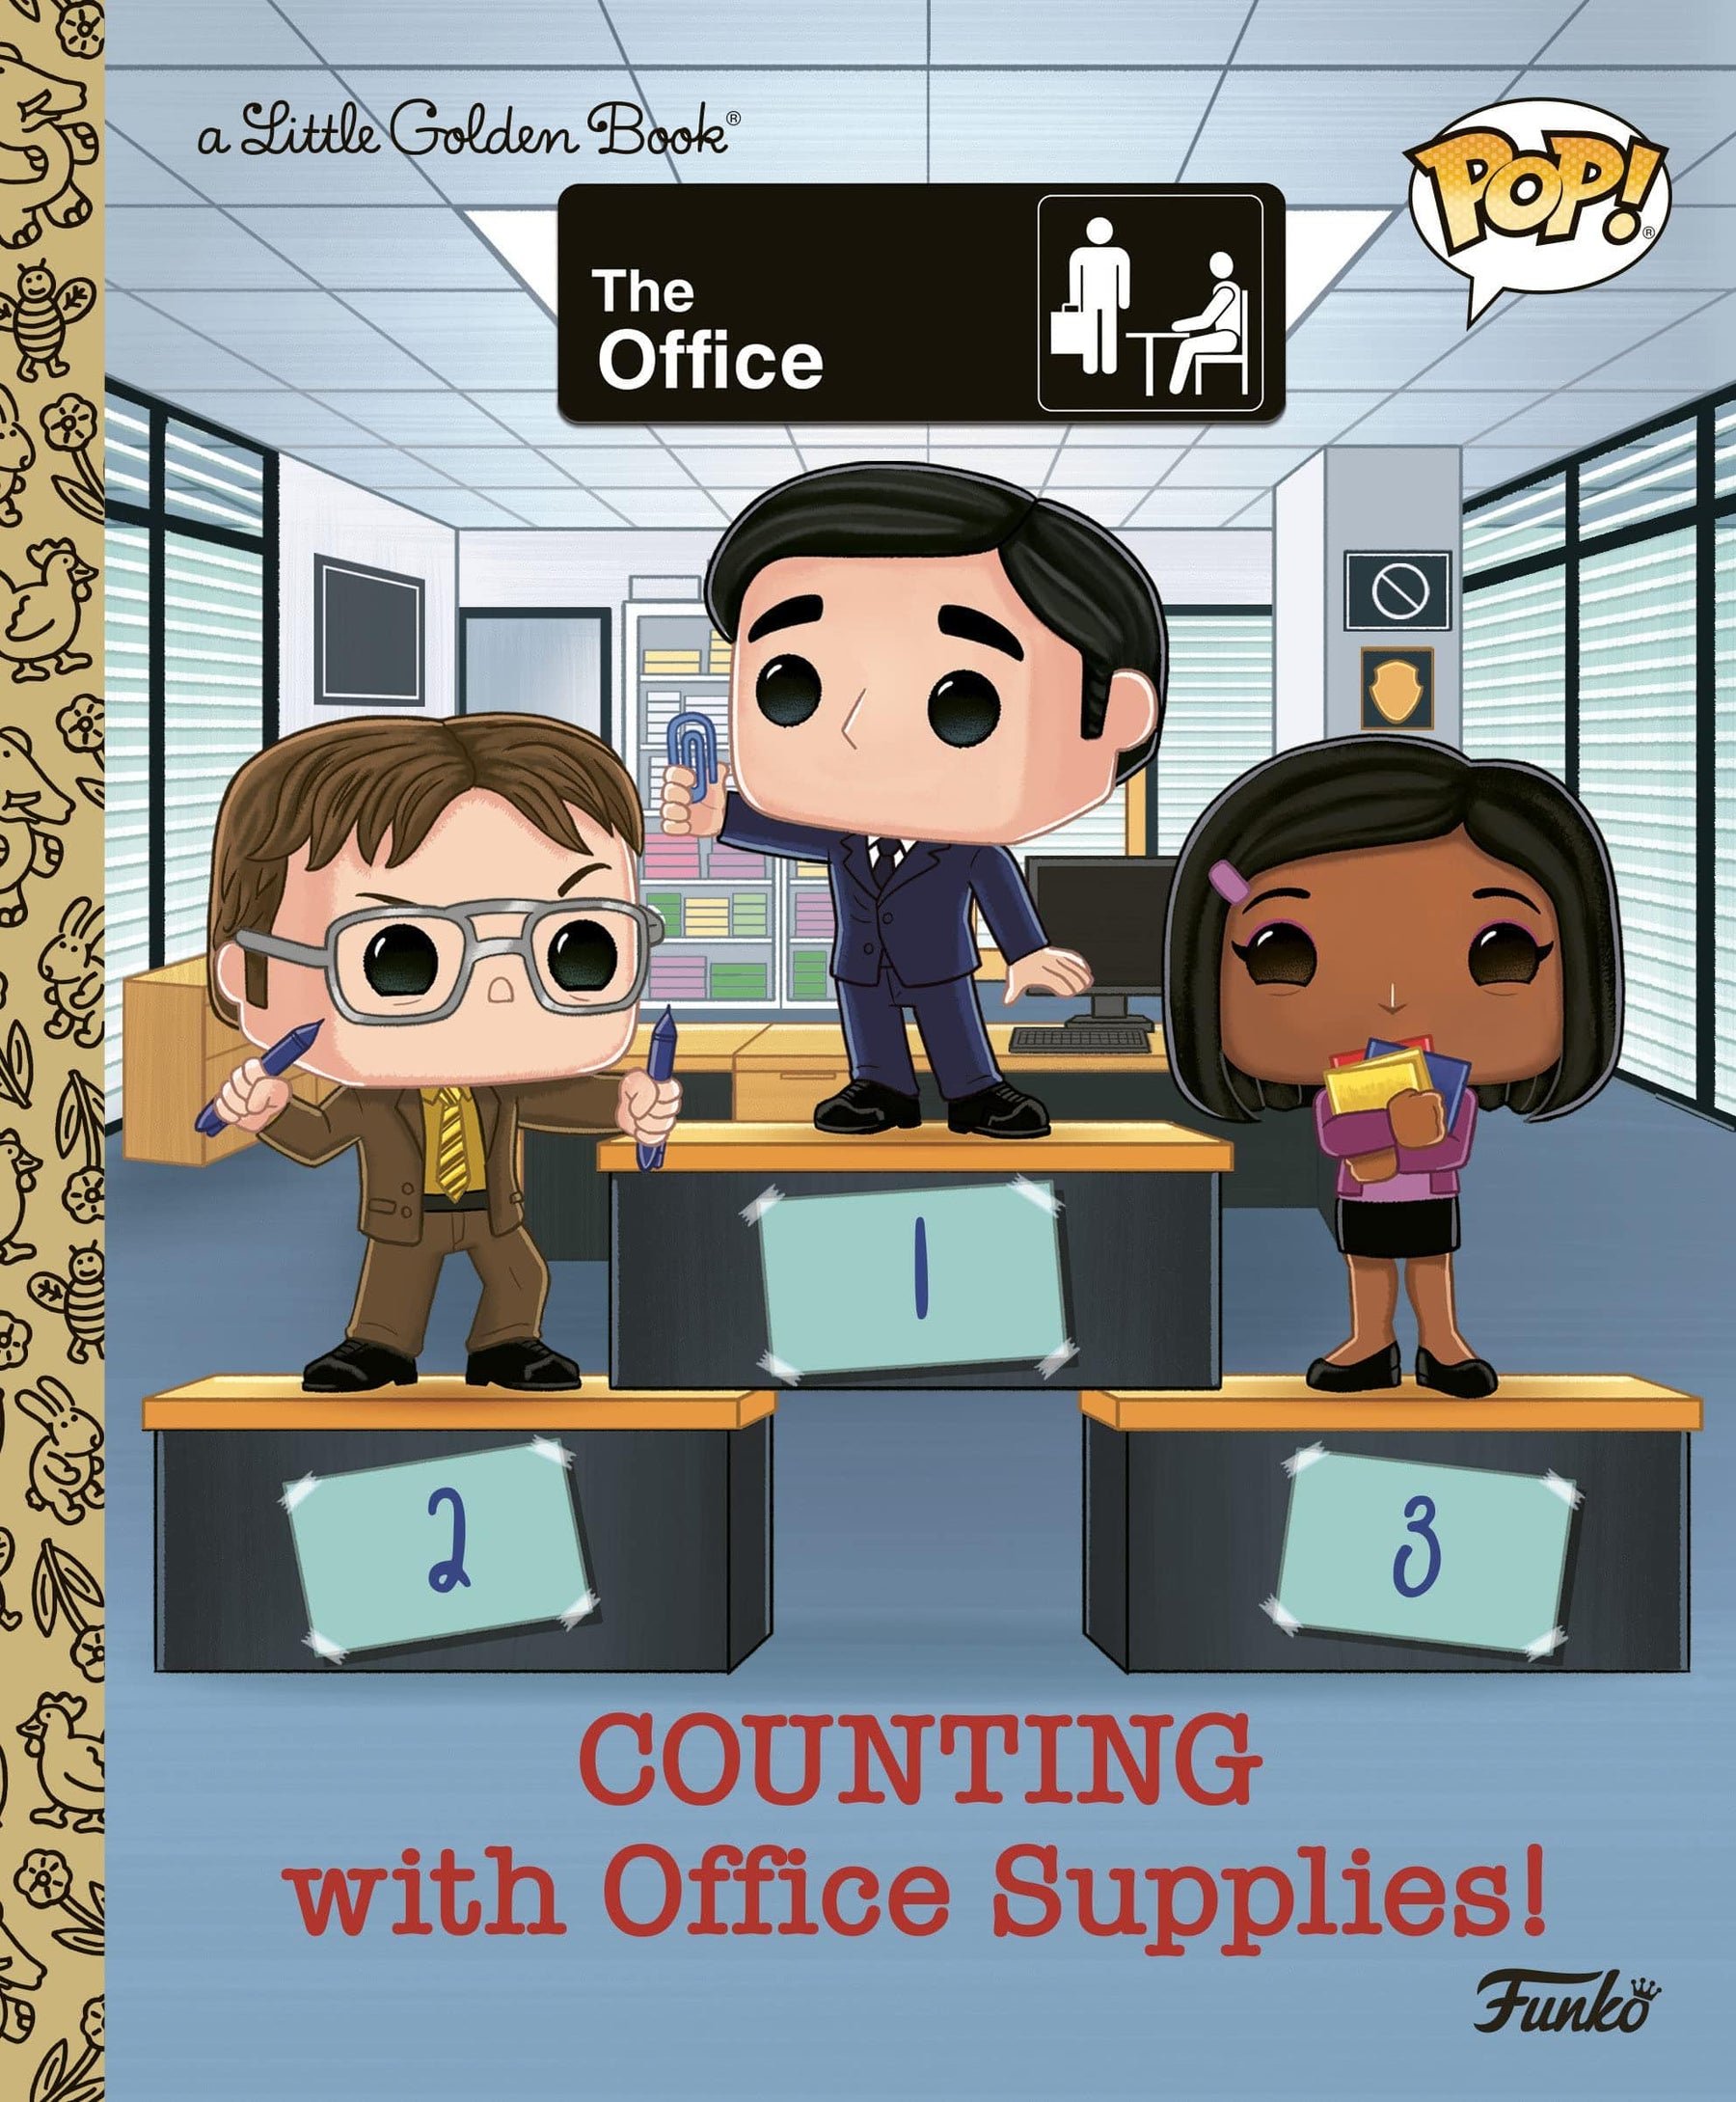 Little Golden Book: Office - Counting with Office Supplies (Funko Pop!) - Third Eye